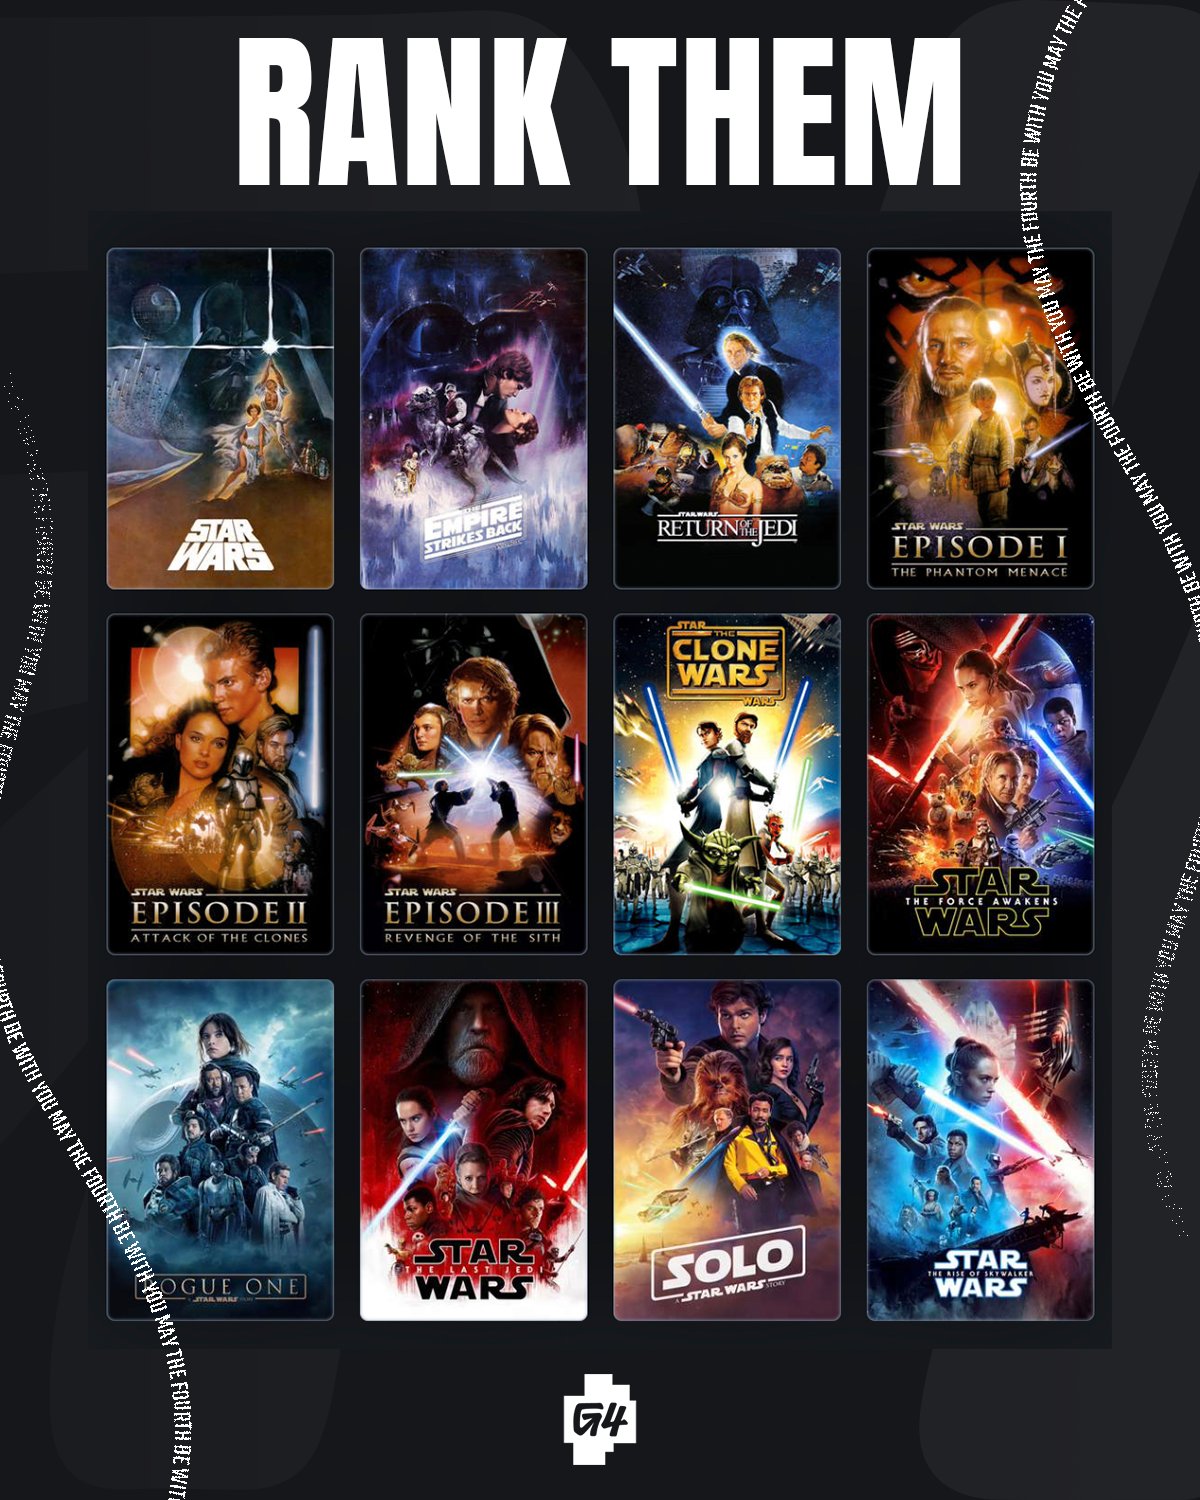 All Star Wars Movies in Order of Release